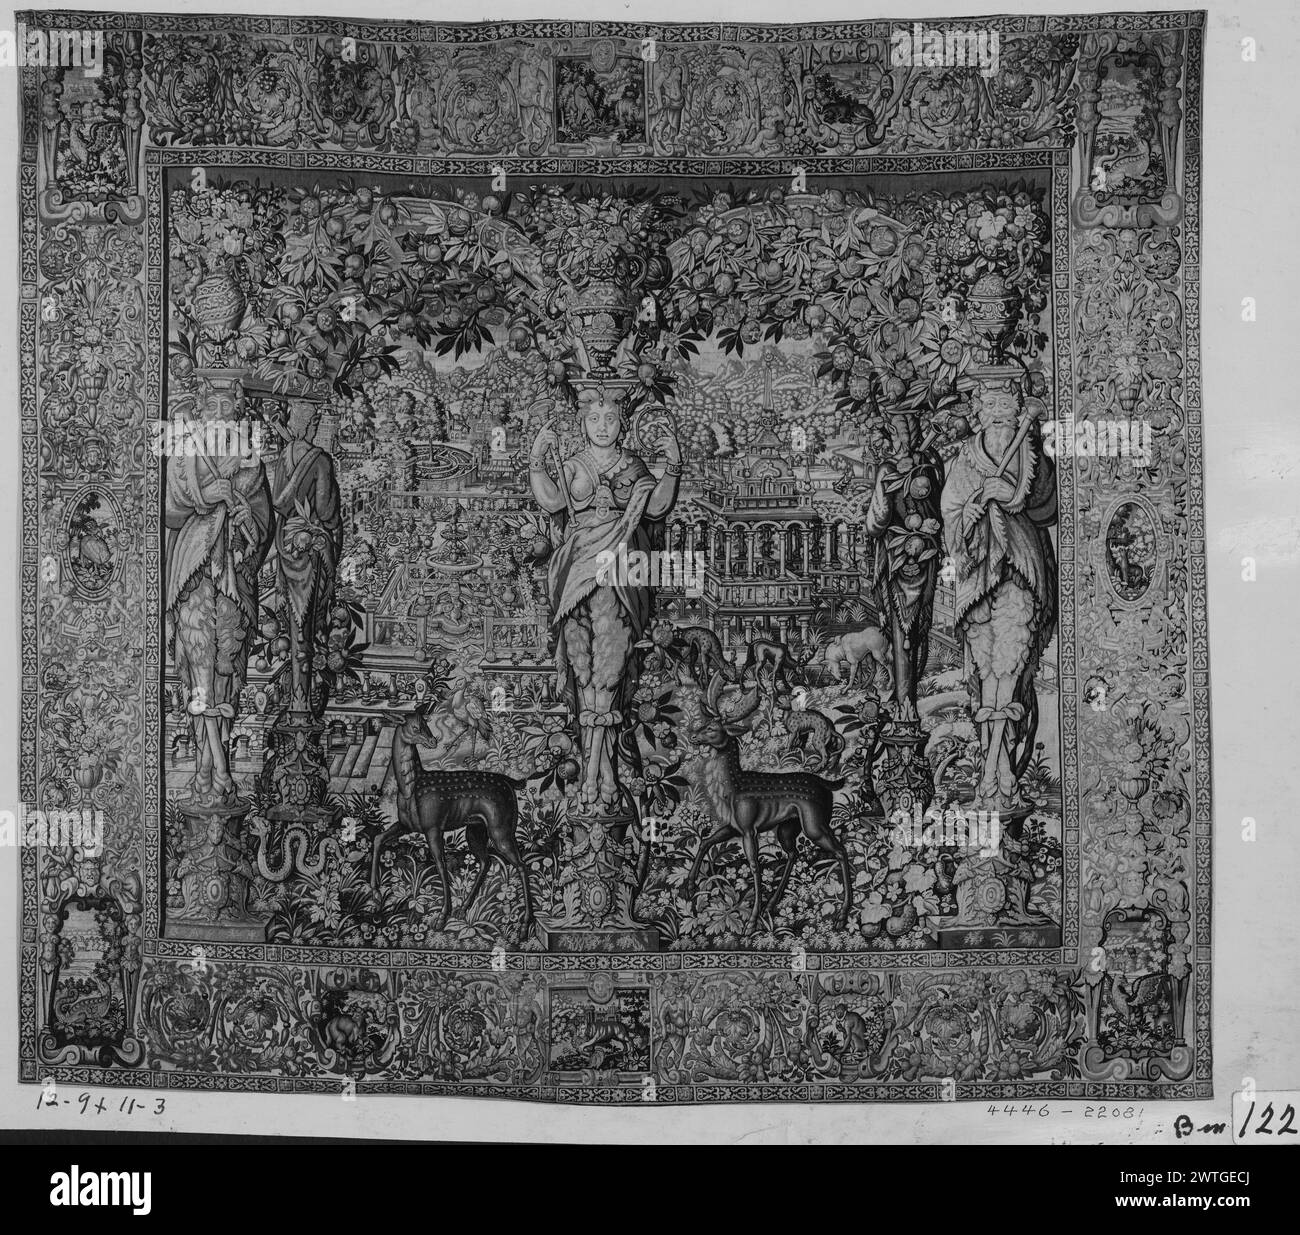 Pergola with bacchic caryatids and atlantes. unknown c. 16101620 Tapestry Dimensions: H 11'3' x W 12'9' Tapestry Materials/Techniques: unknown Culture: Flemish Weaving Center: Brussels Ownership History: French & Co. purchased from The Kent Gallery 1/4/1920; sent to Mr. C. Geren (?) for approval on 6/6/1961 (returned?). 2 deer flank caryatid; garden park beyond (BRD) segmented border with scenes in cartouches, vases with flowers, masks & other decorative elements French & Co. stock sheet in archive, 22081 Related Works: Compositionally similar tapestries (very similar cartoon), GCPA 0236886-02 Stock Photo